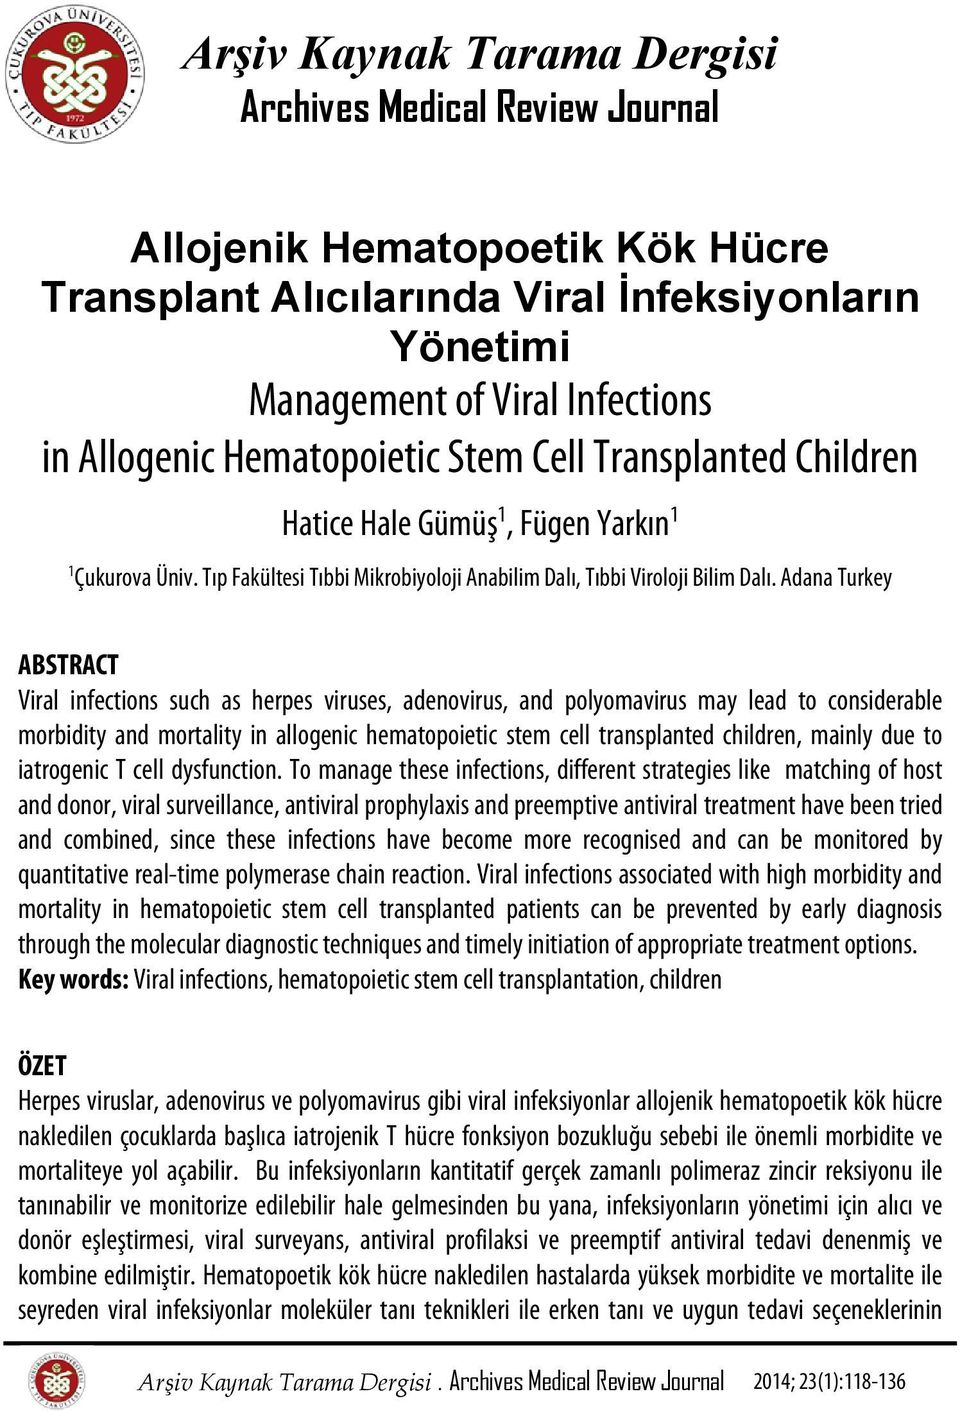 Adana Turkey ABSTRACT Viral infections such as herpes viruses, adenovirus, and polyomavirus may lead to considerable morbidity and mortality in allogenic hematopoietic stem cell transplanted